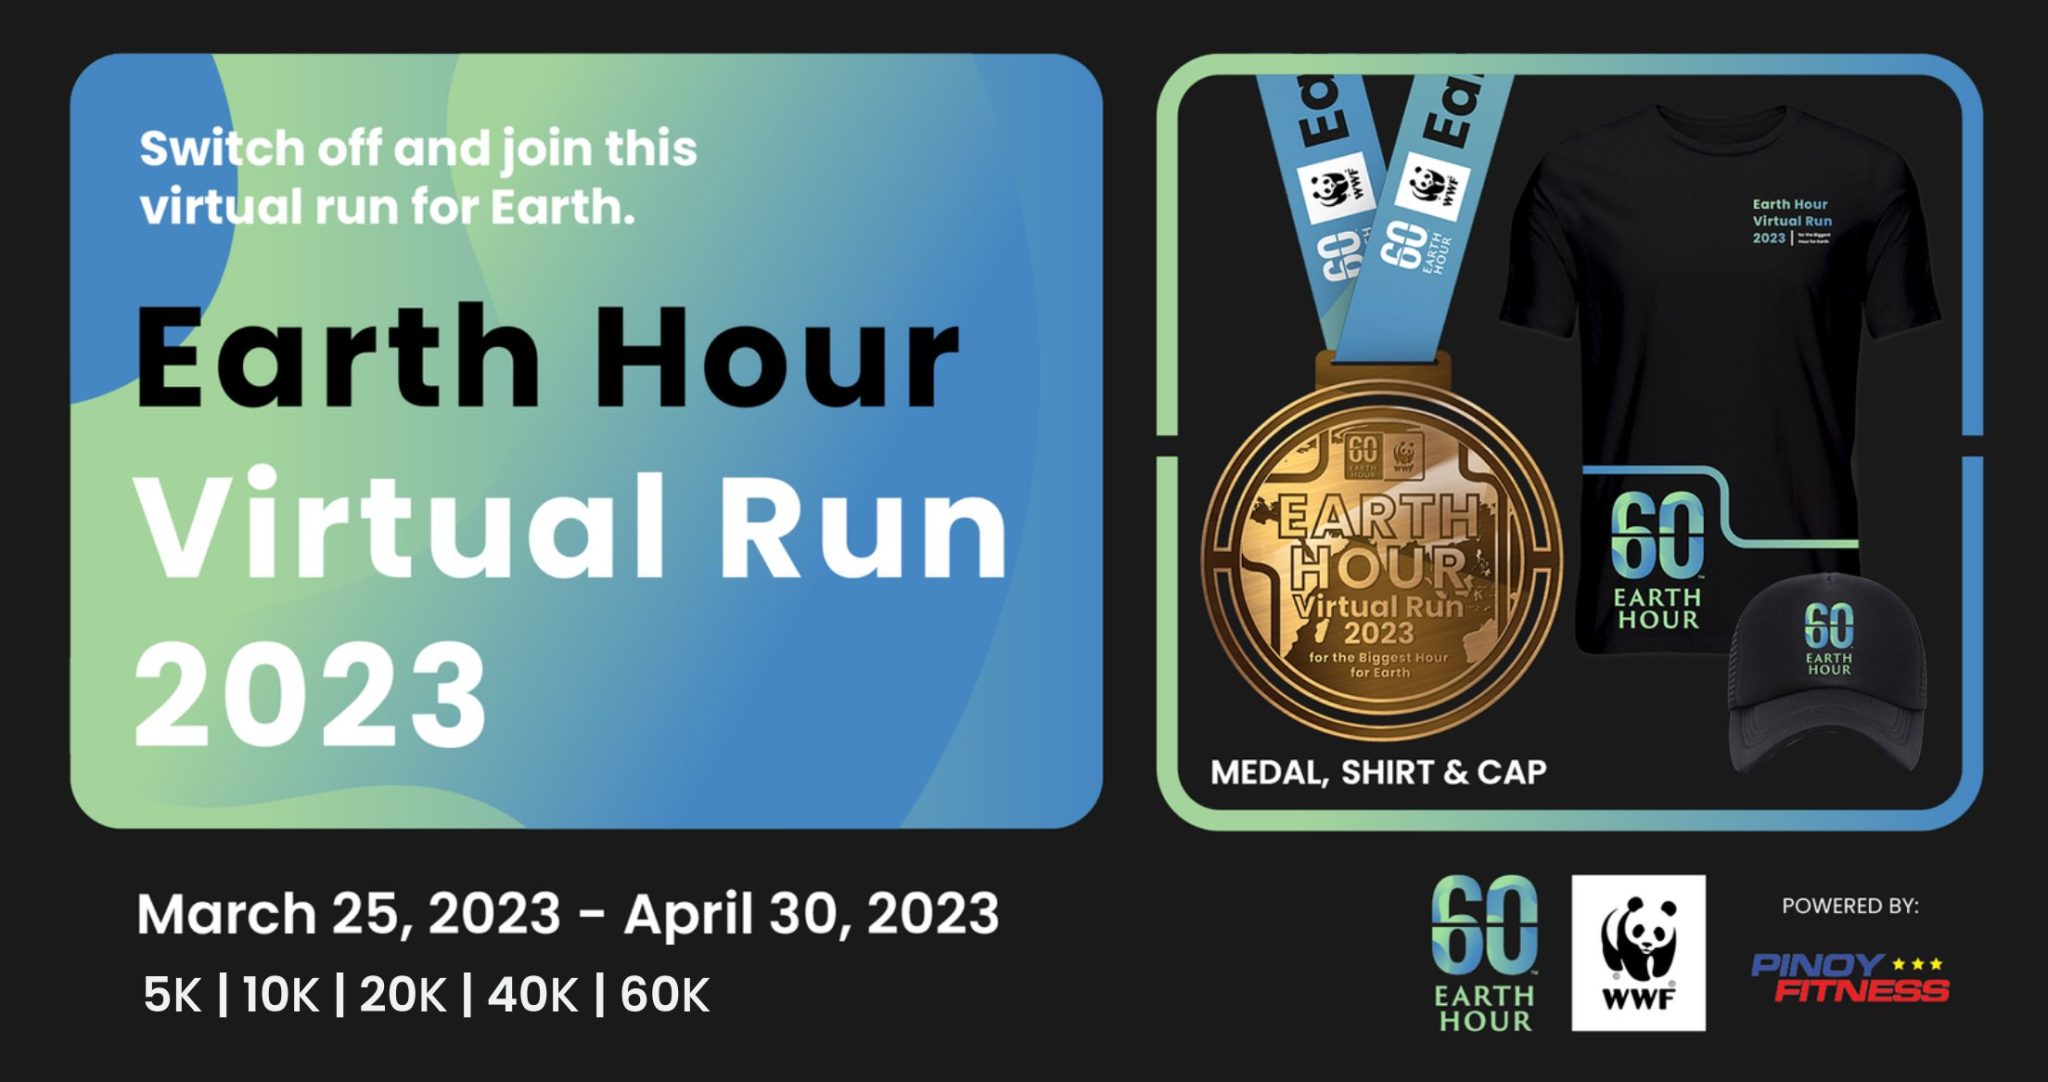 WWF Earth Hour Virtual Run 2023 PH clocks in on the Biggest Hour for